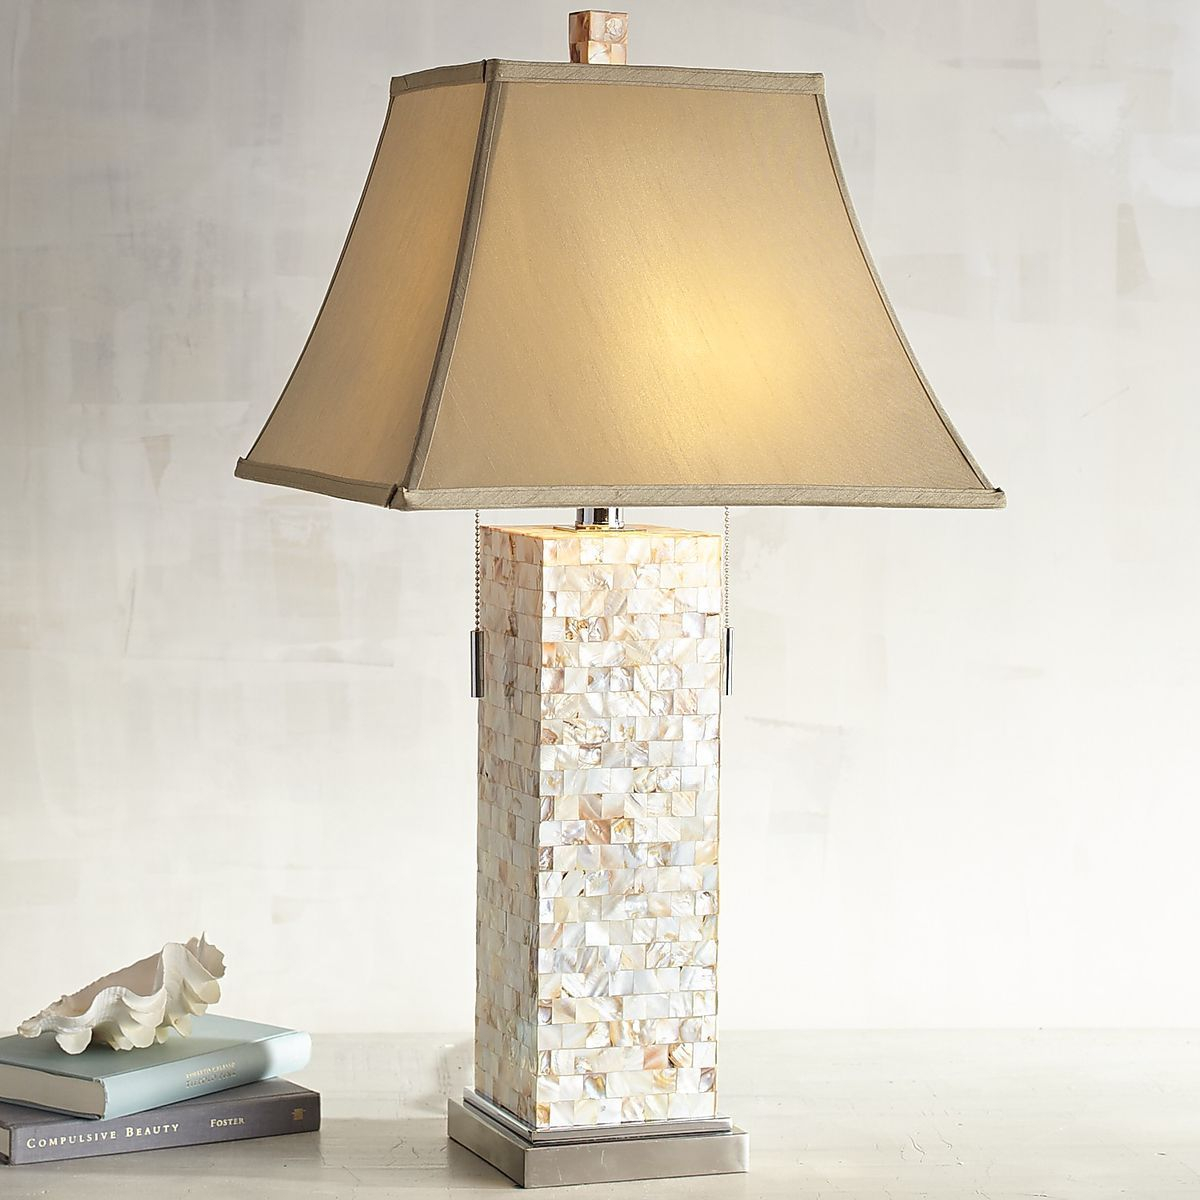 Mother Of Pearl Table Lamp Lamps And Lighting Bedroom regarding sizing 1200 X 1200